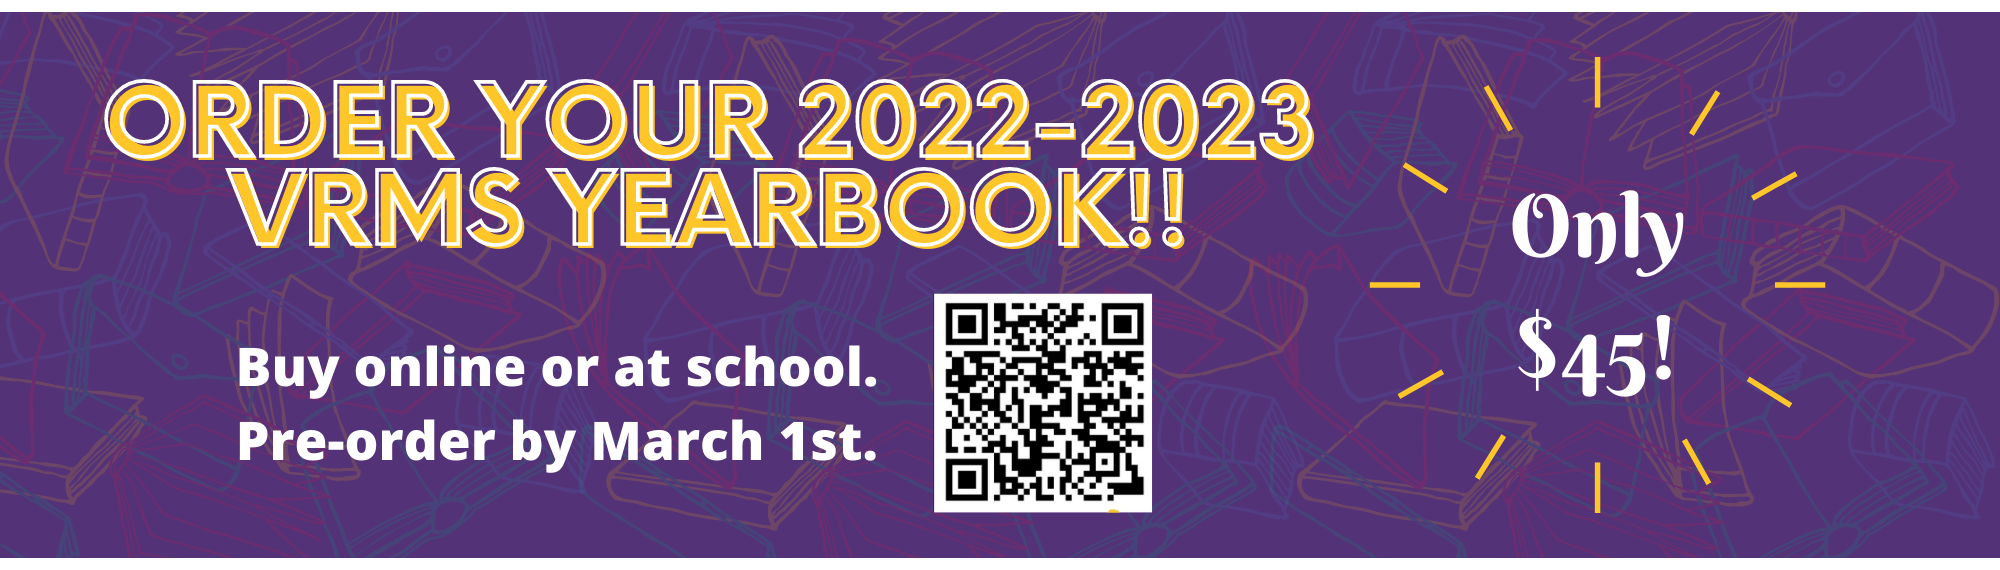 Buy your 2022-2023 yearbook! Only 45.00.  Scan the qr code to order online.